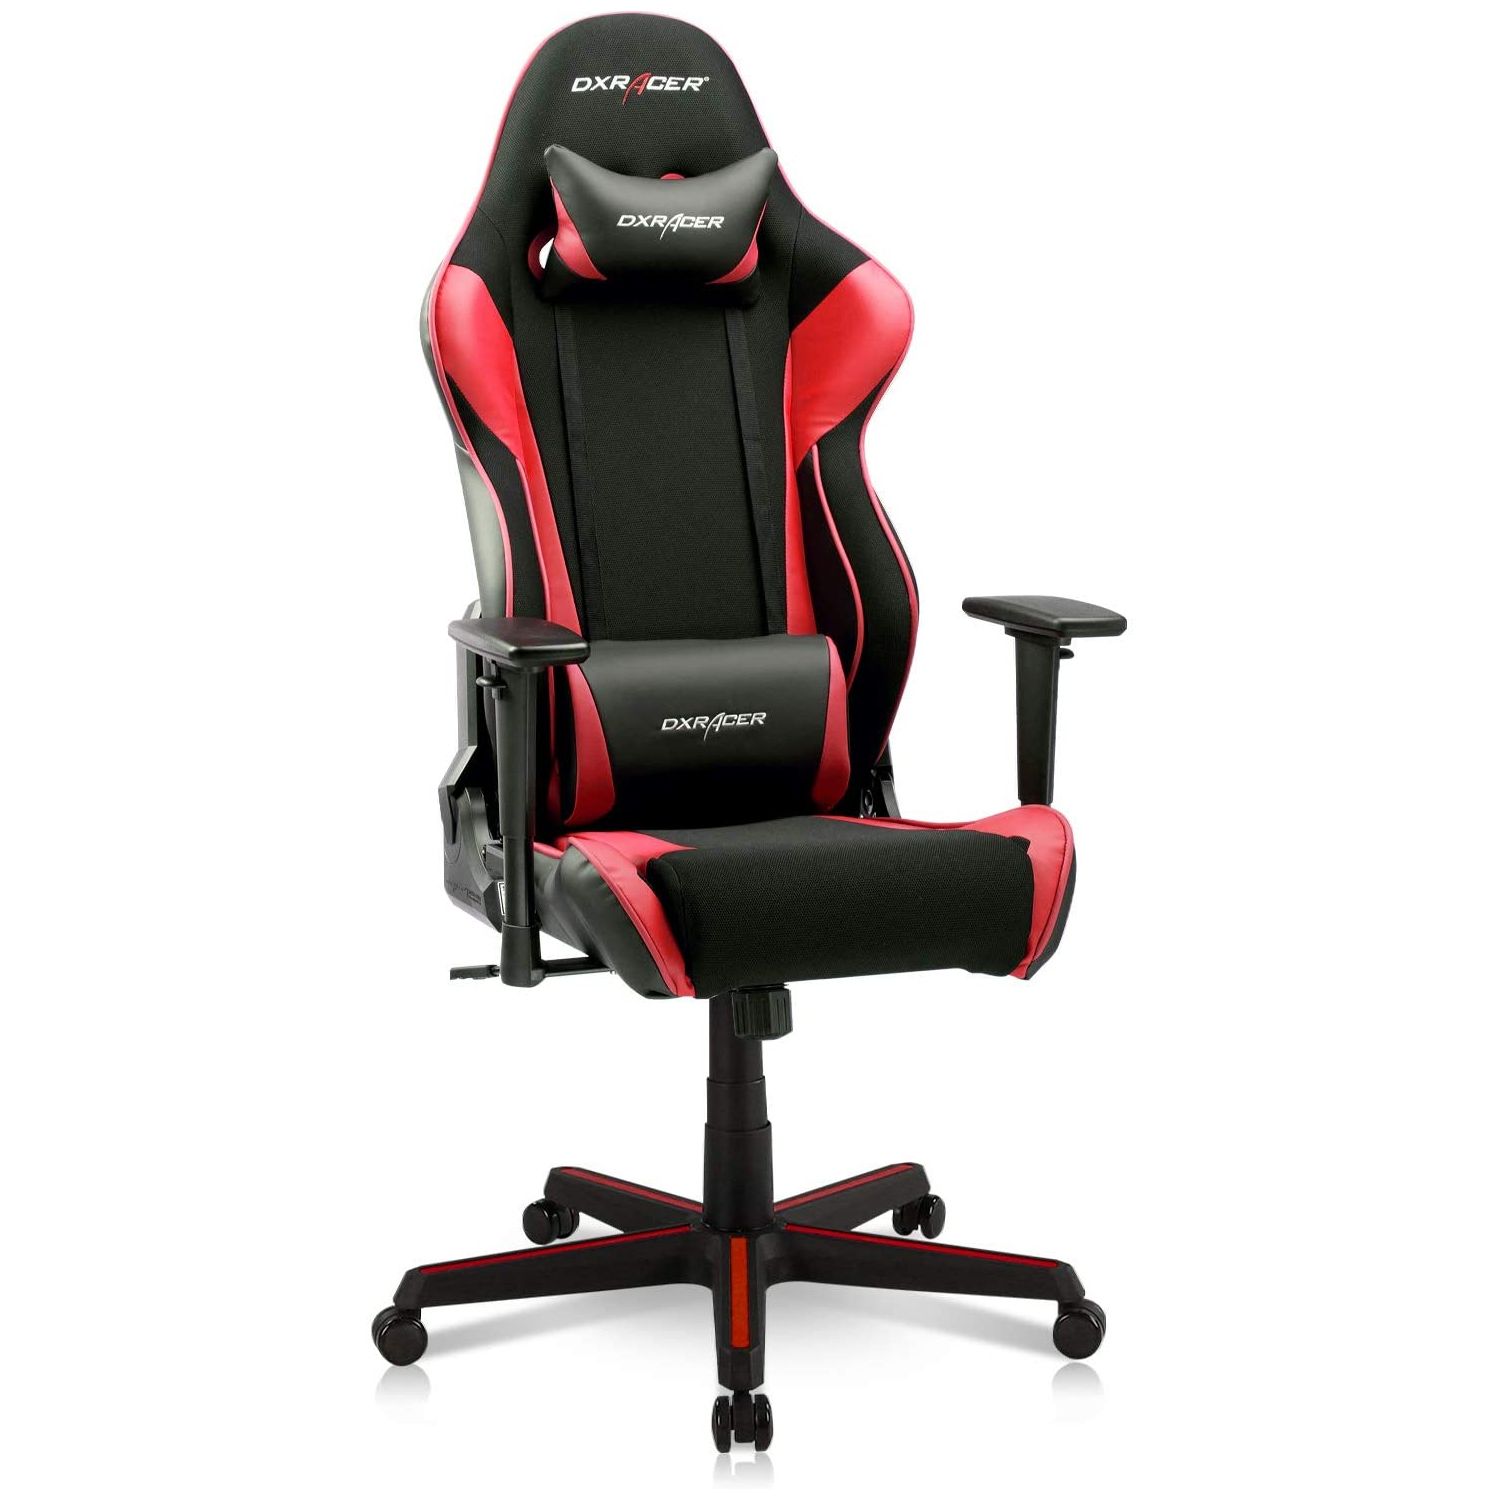 Image for DXRacer Racing Ergonomic Computer Home Office Desk Gaming Chair, Black and Red at Kohl's.